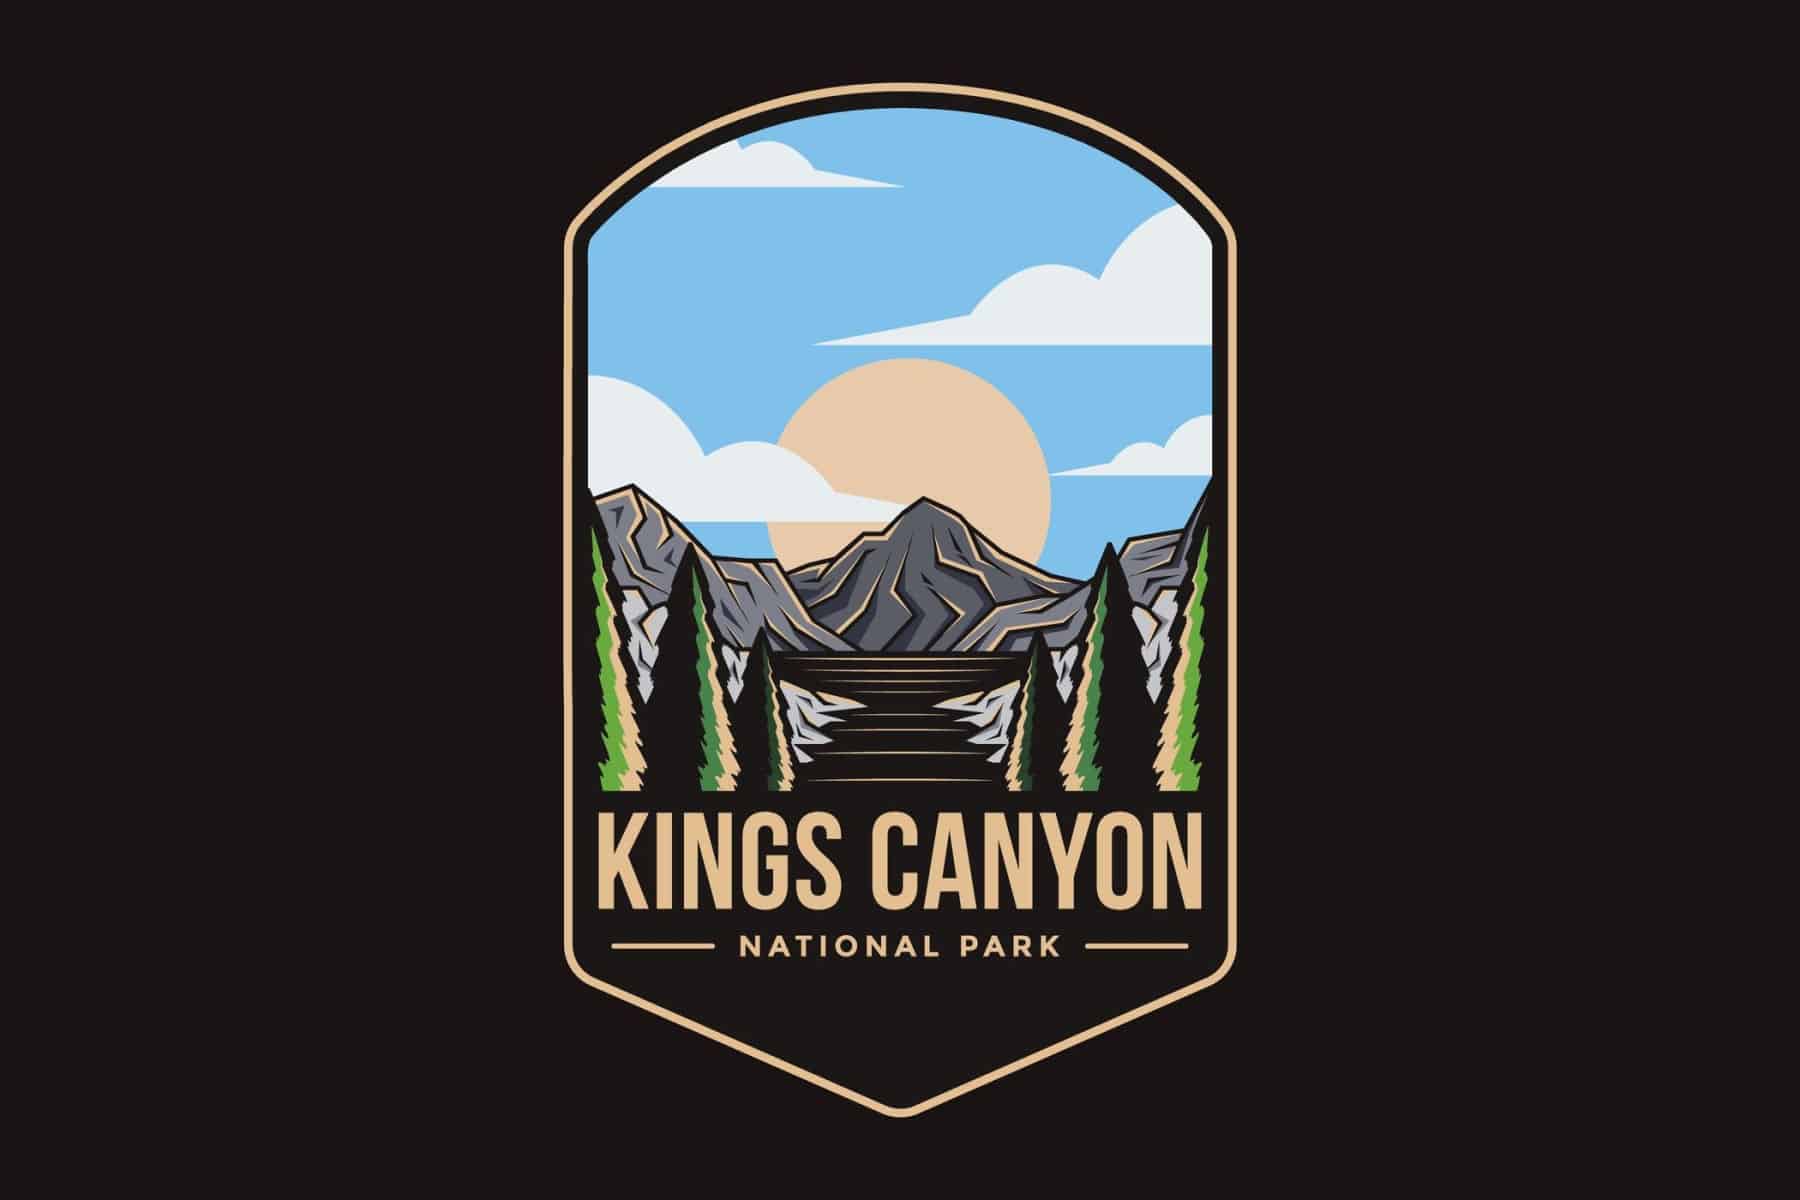 Kings Canyon National Park Facts